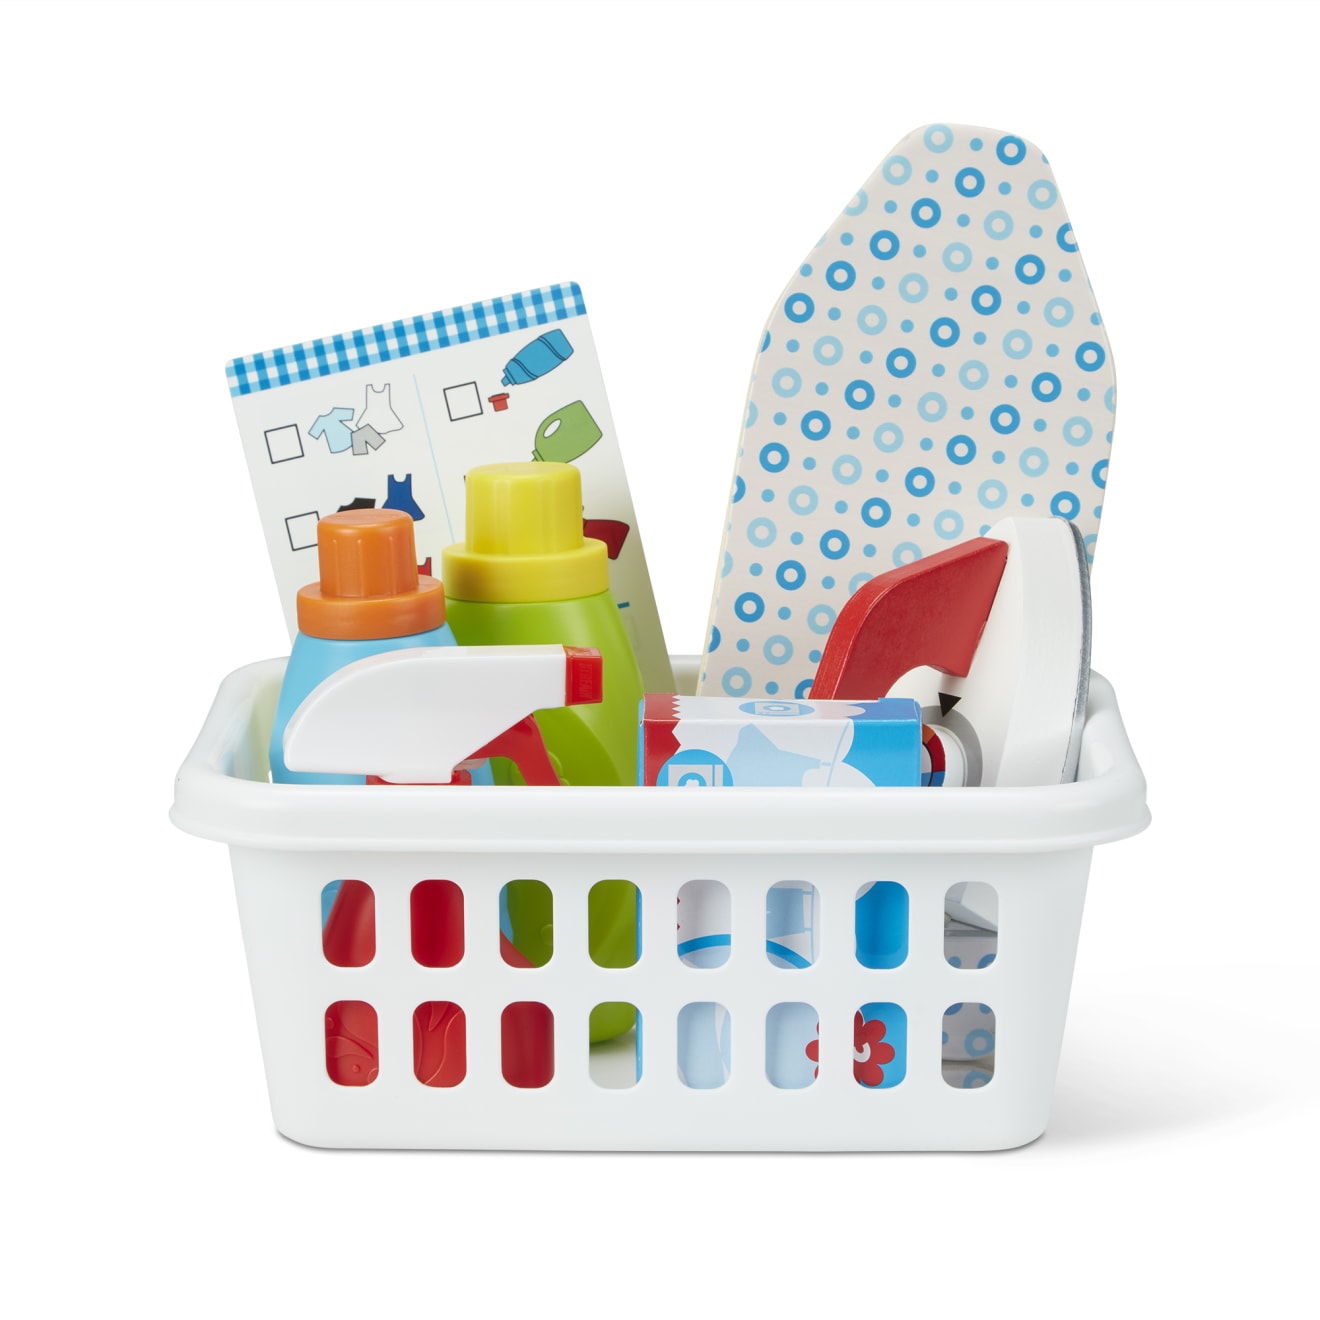 https://cdn.shopify.com/s/files/1/0550/8487/5830/products/Laundry-Basket-Play-Set-008608-1-Pieces-Out.jpg?v=1664898981